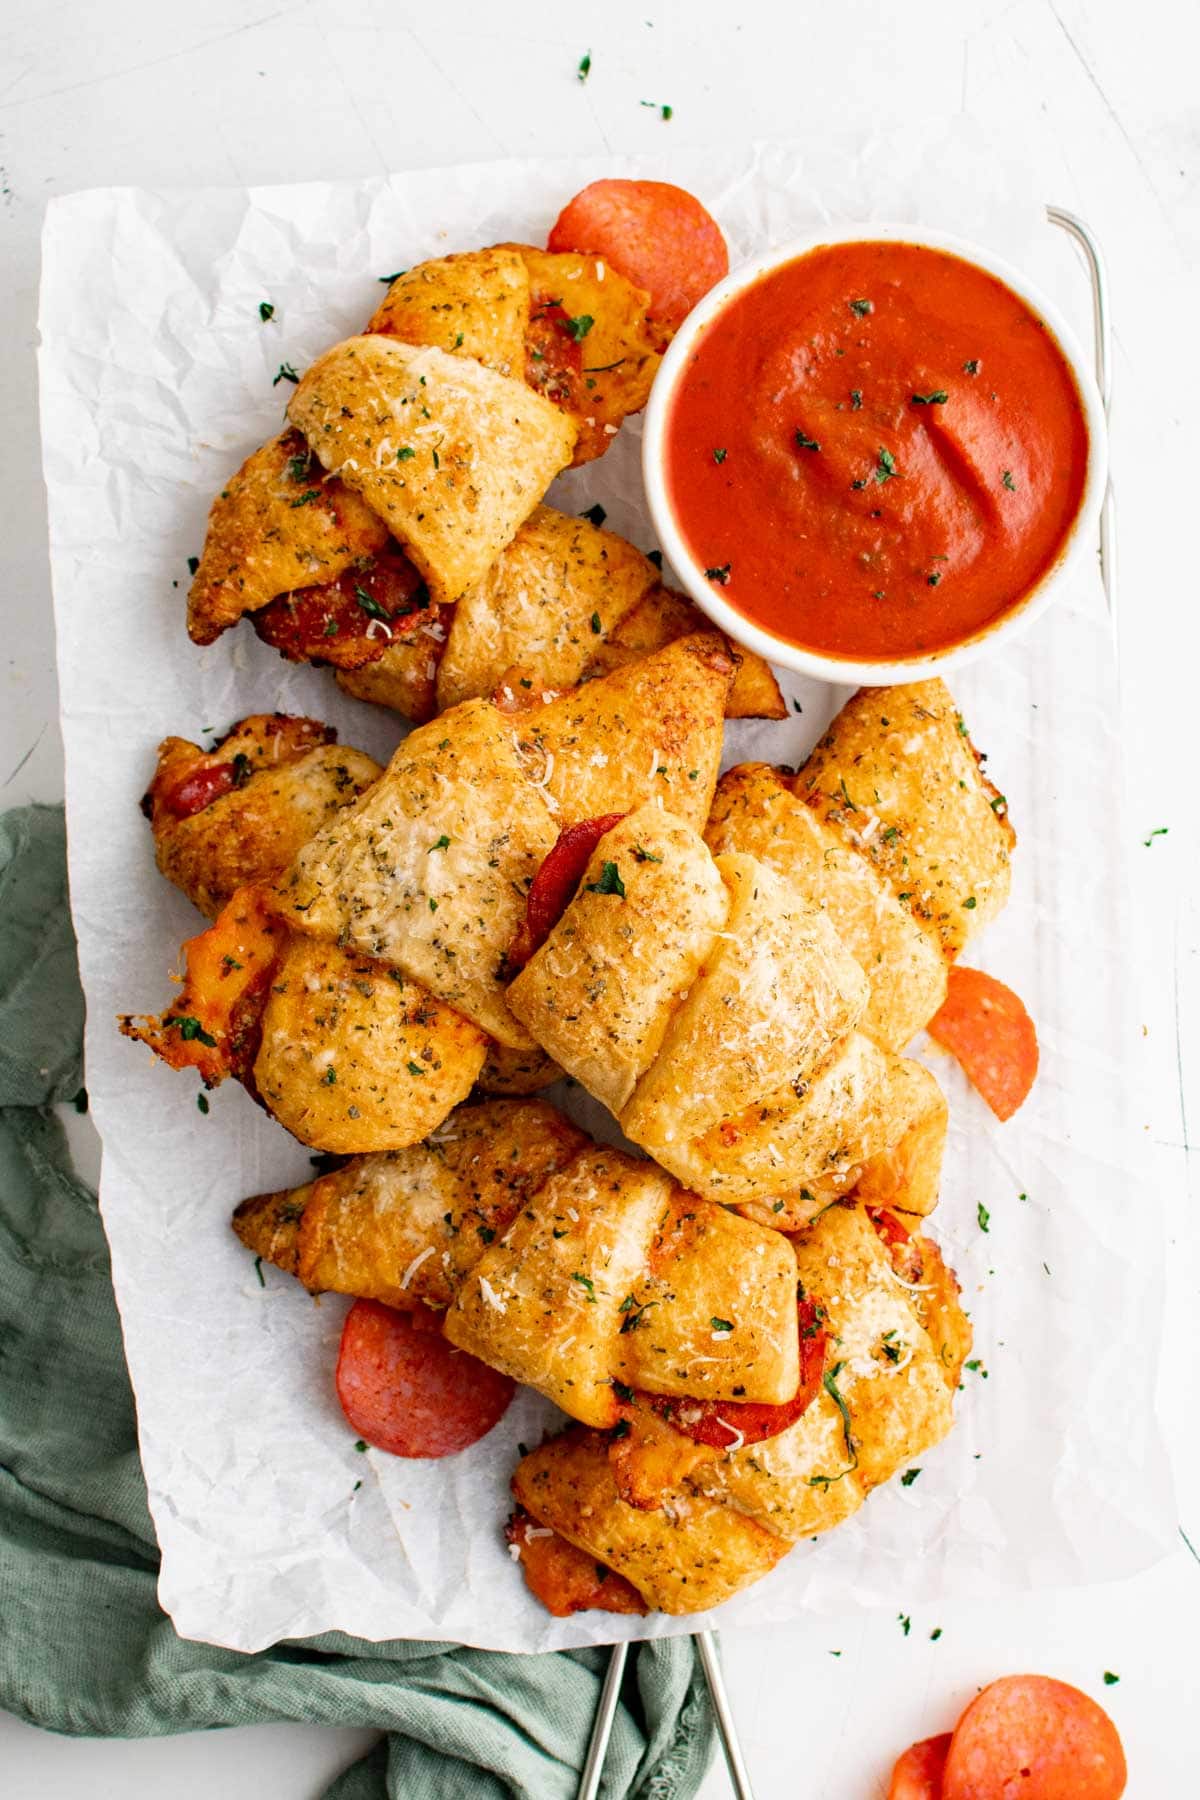 Pile of crescent rolls with pepperoni, italian seasoning and a dish of marinara sauce.